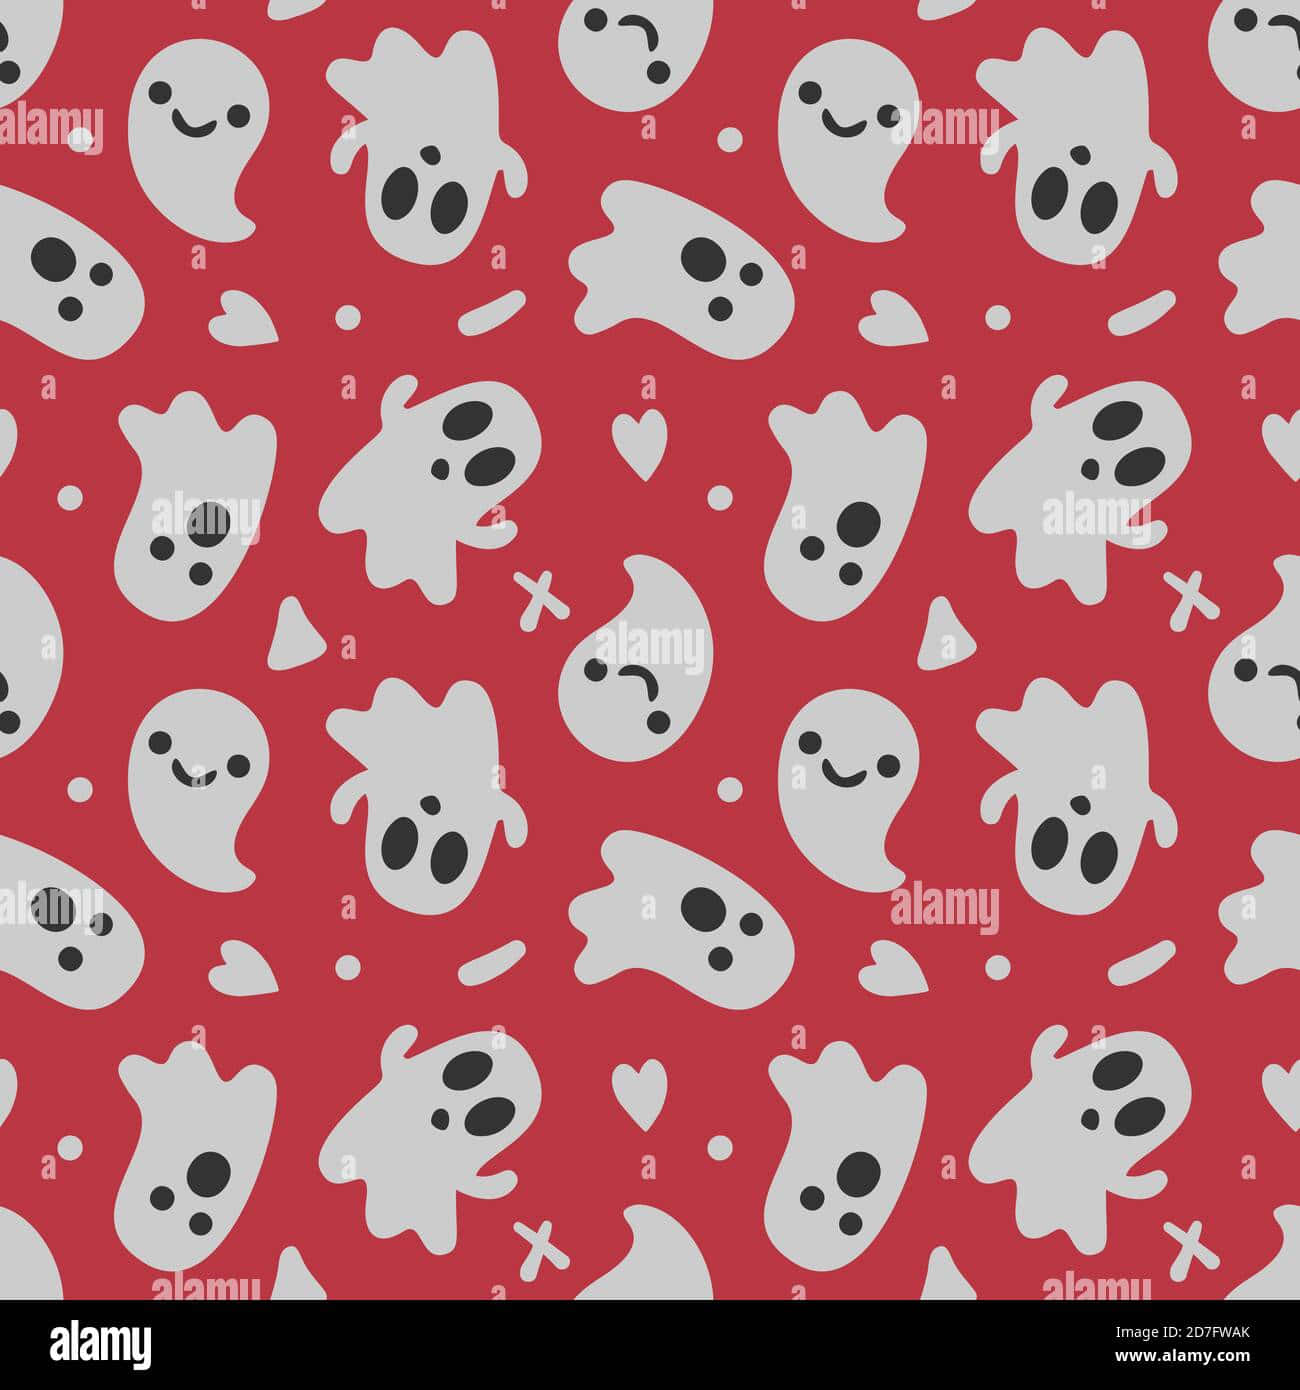 Ghosts And Hearts On A Red Background - Stock Image Wallpaper